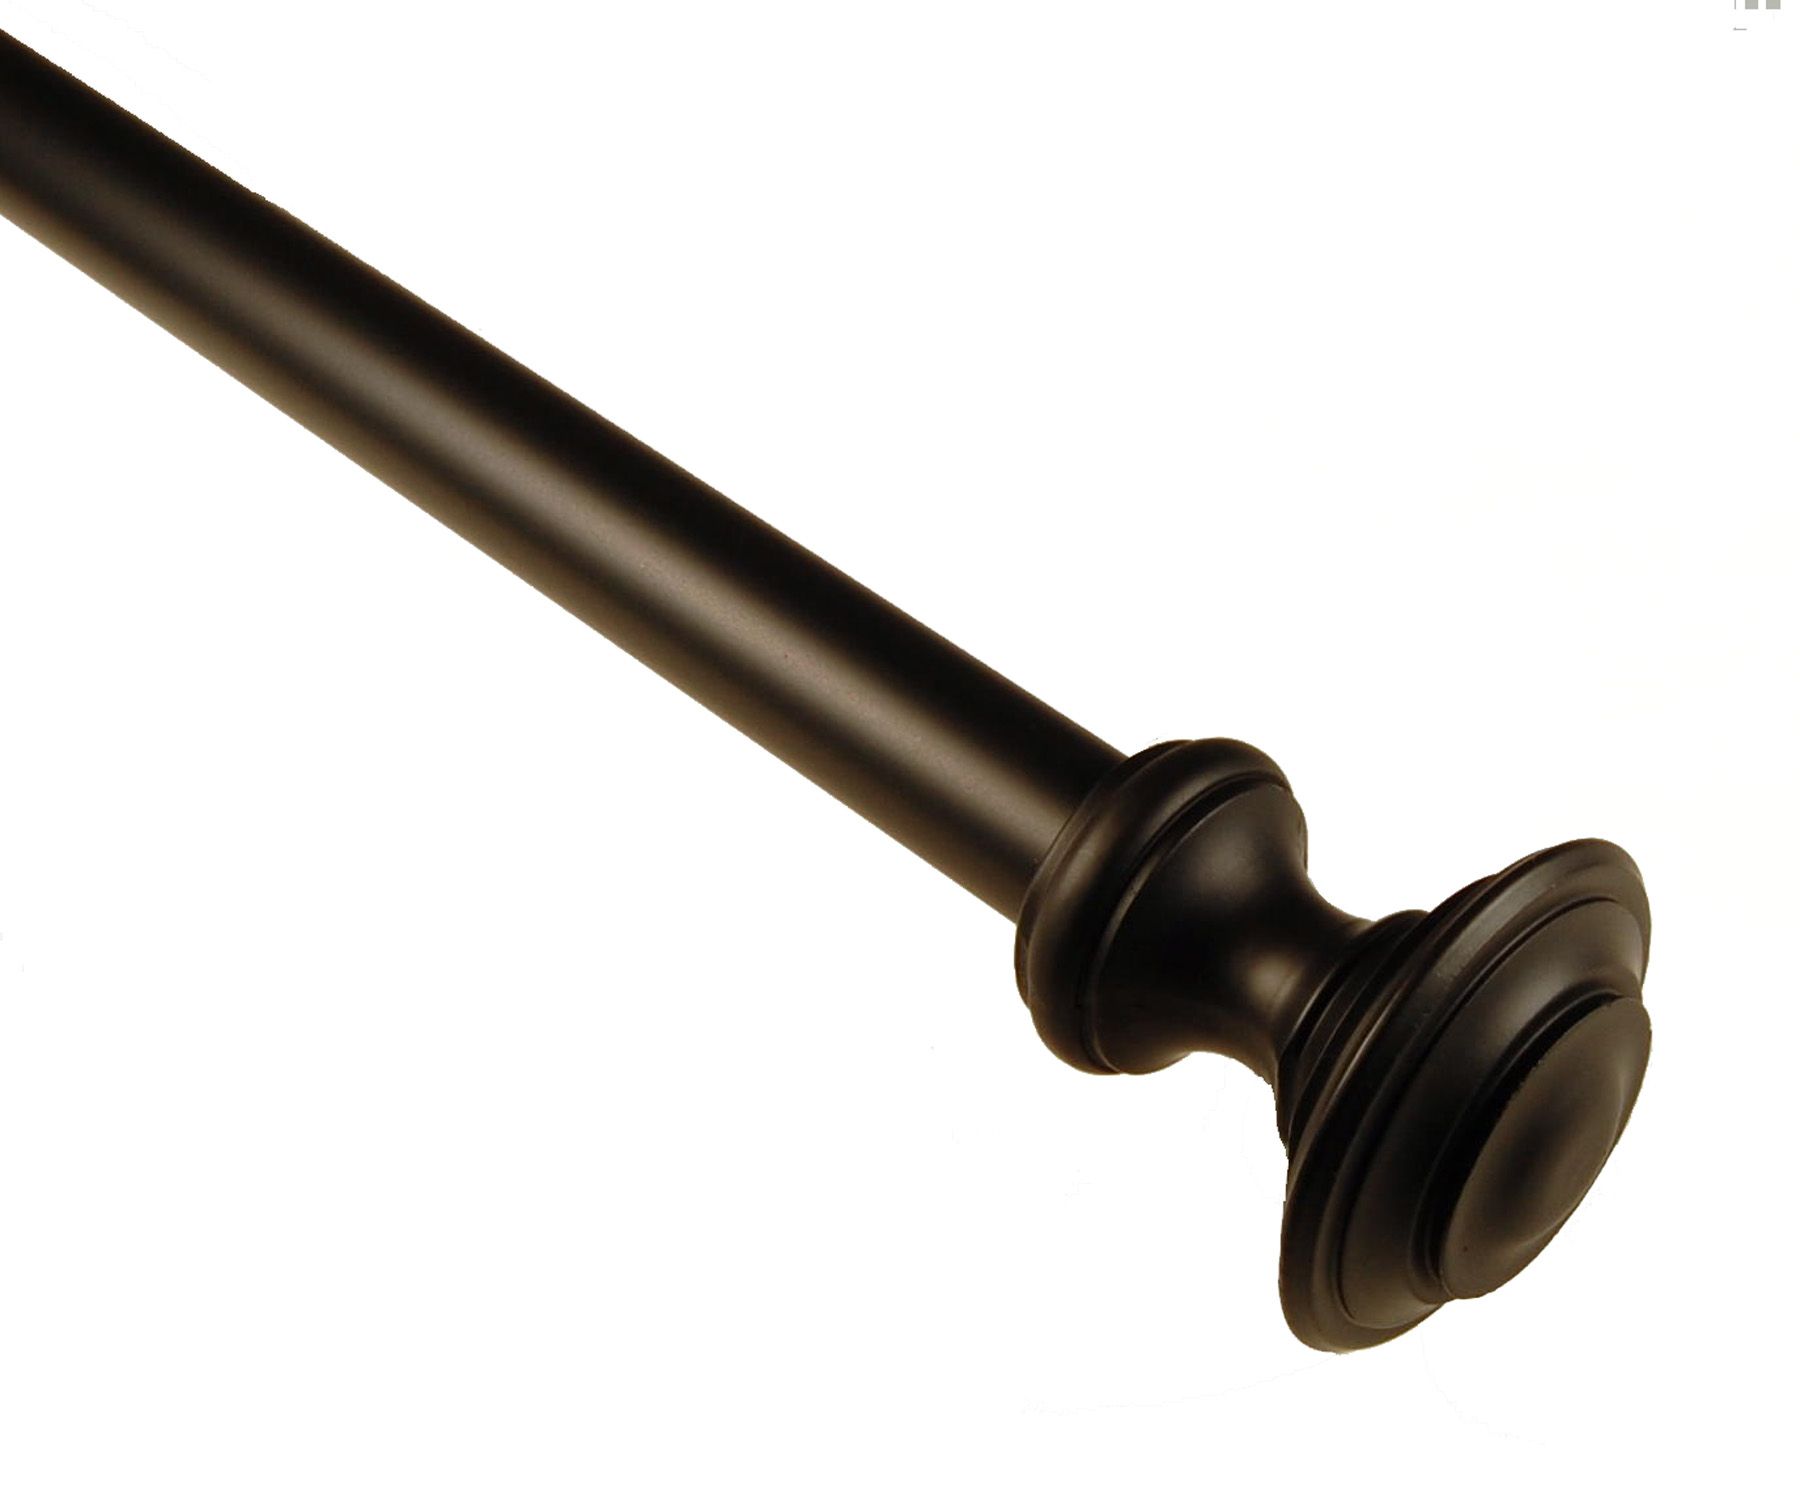 BCL Drapery Hardware, Clifton Curtain Rod, Black Finish, 48-inch to 86-inch